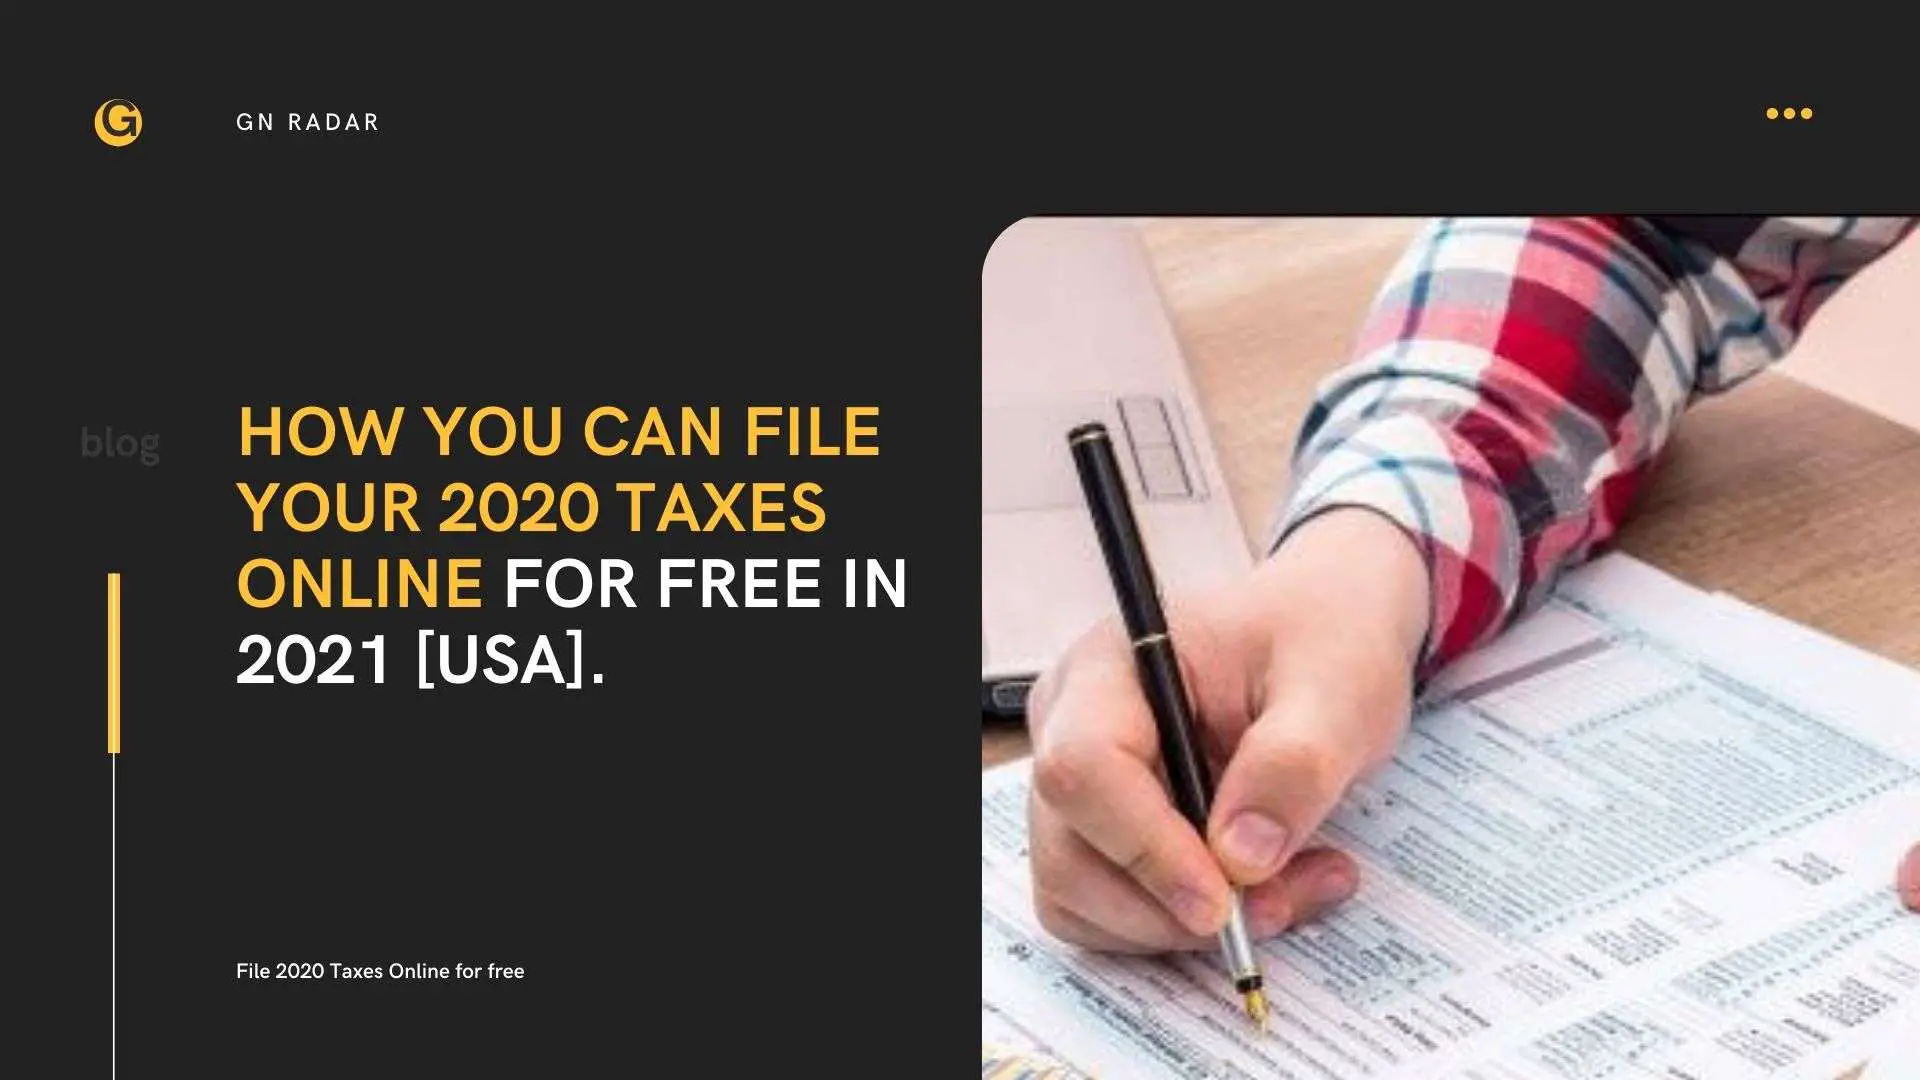 How you can file your 2020 Taxes Online for free in 2021 [USA].